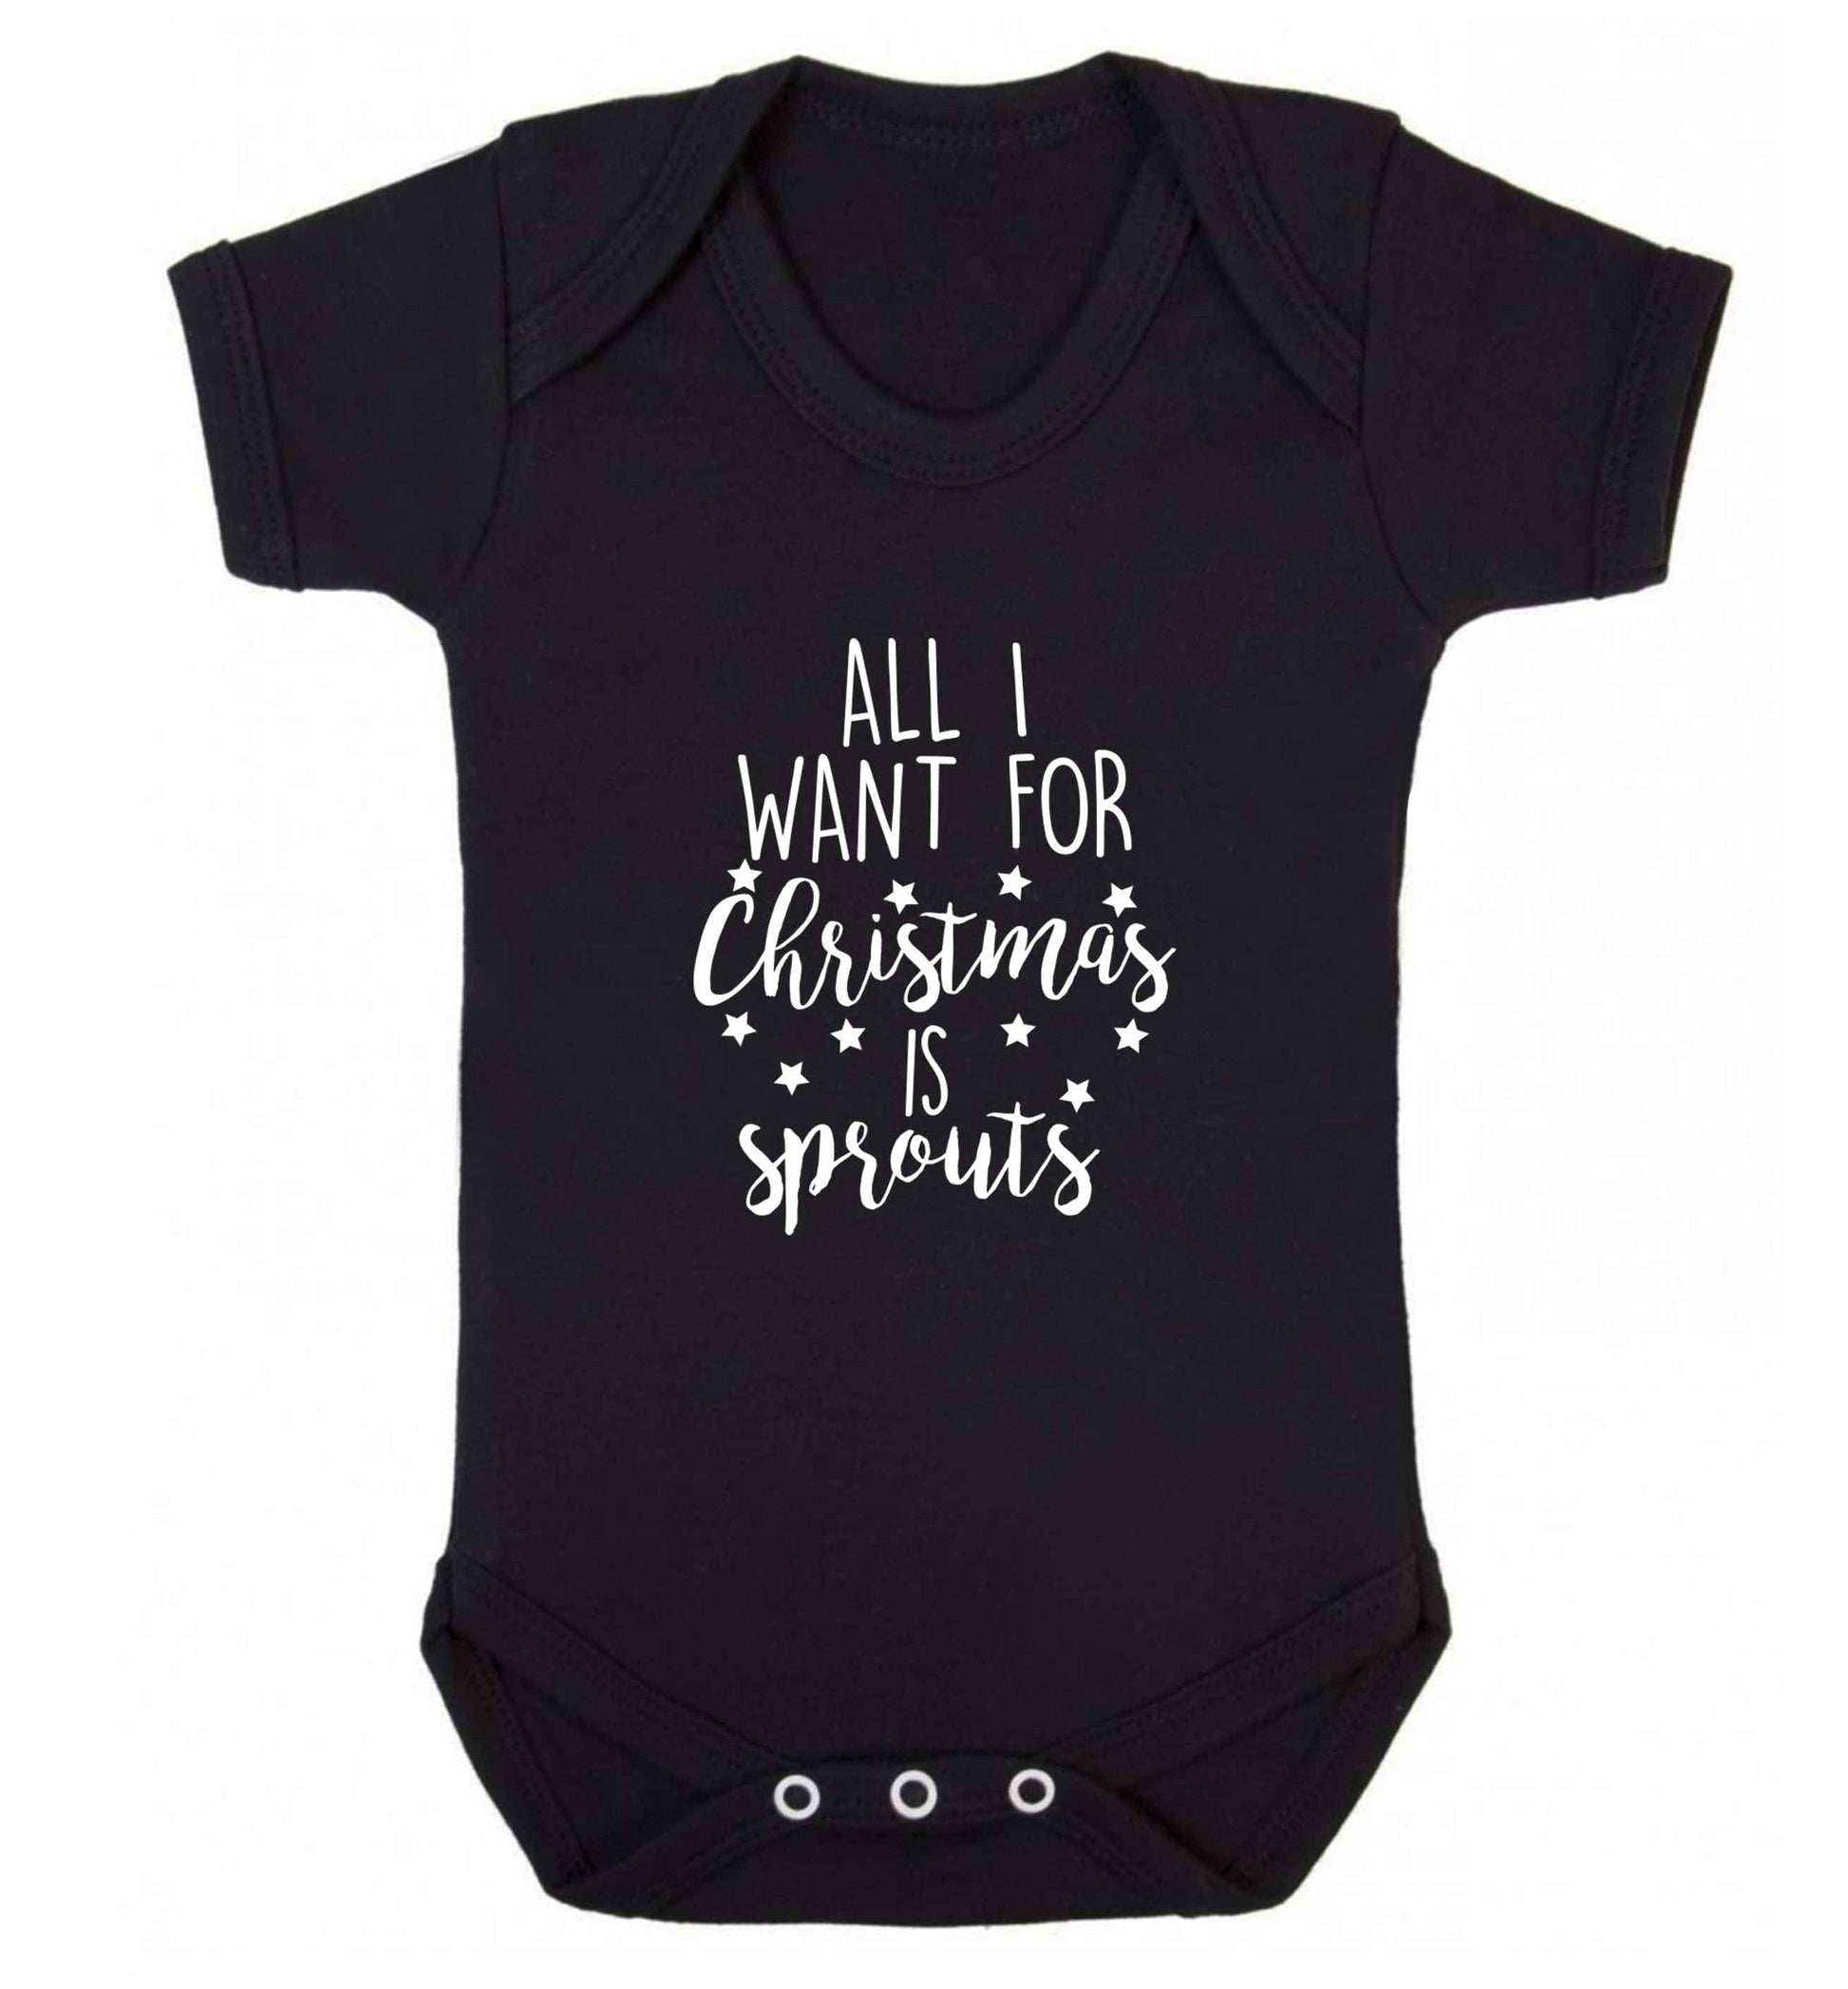 All I want for Christmas is sprouts baby vest black 18-24 months